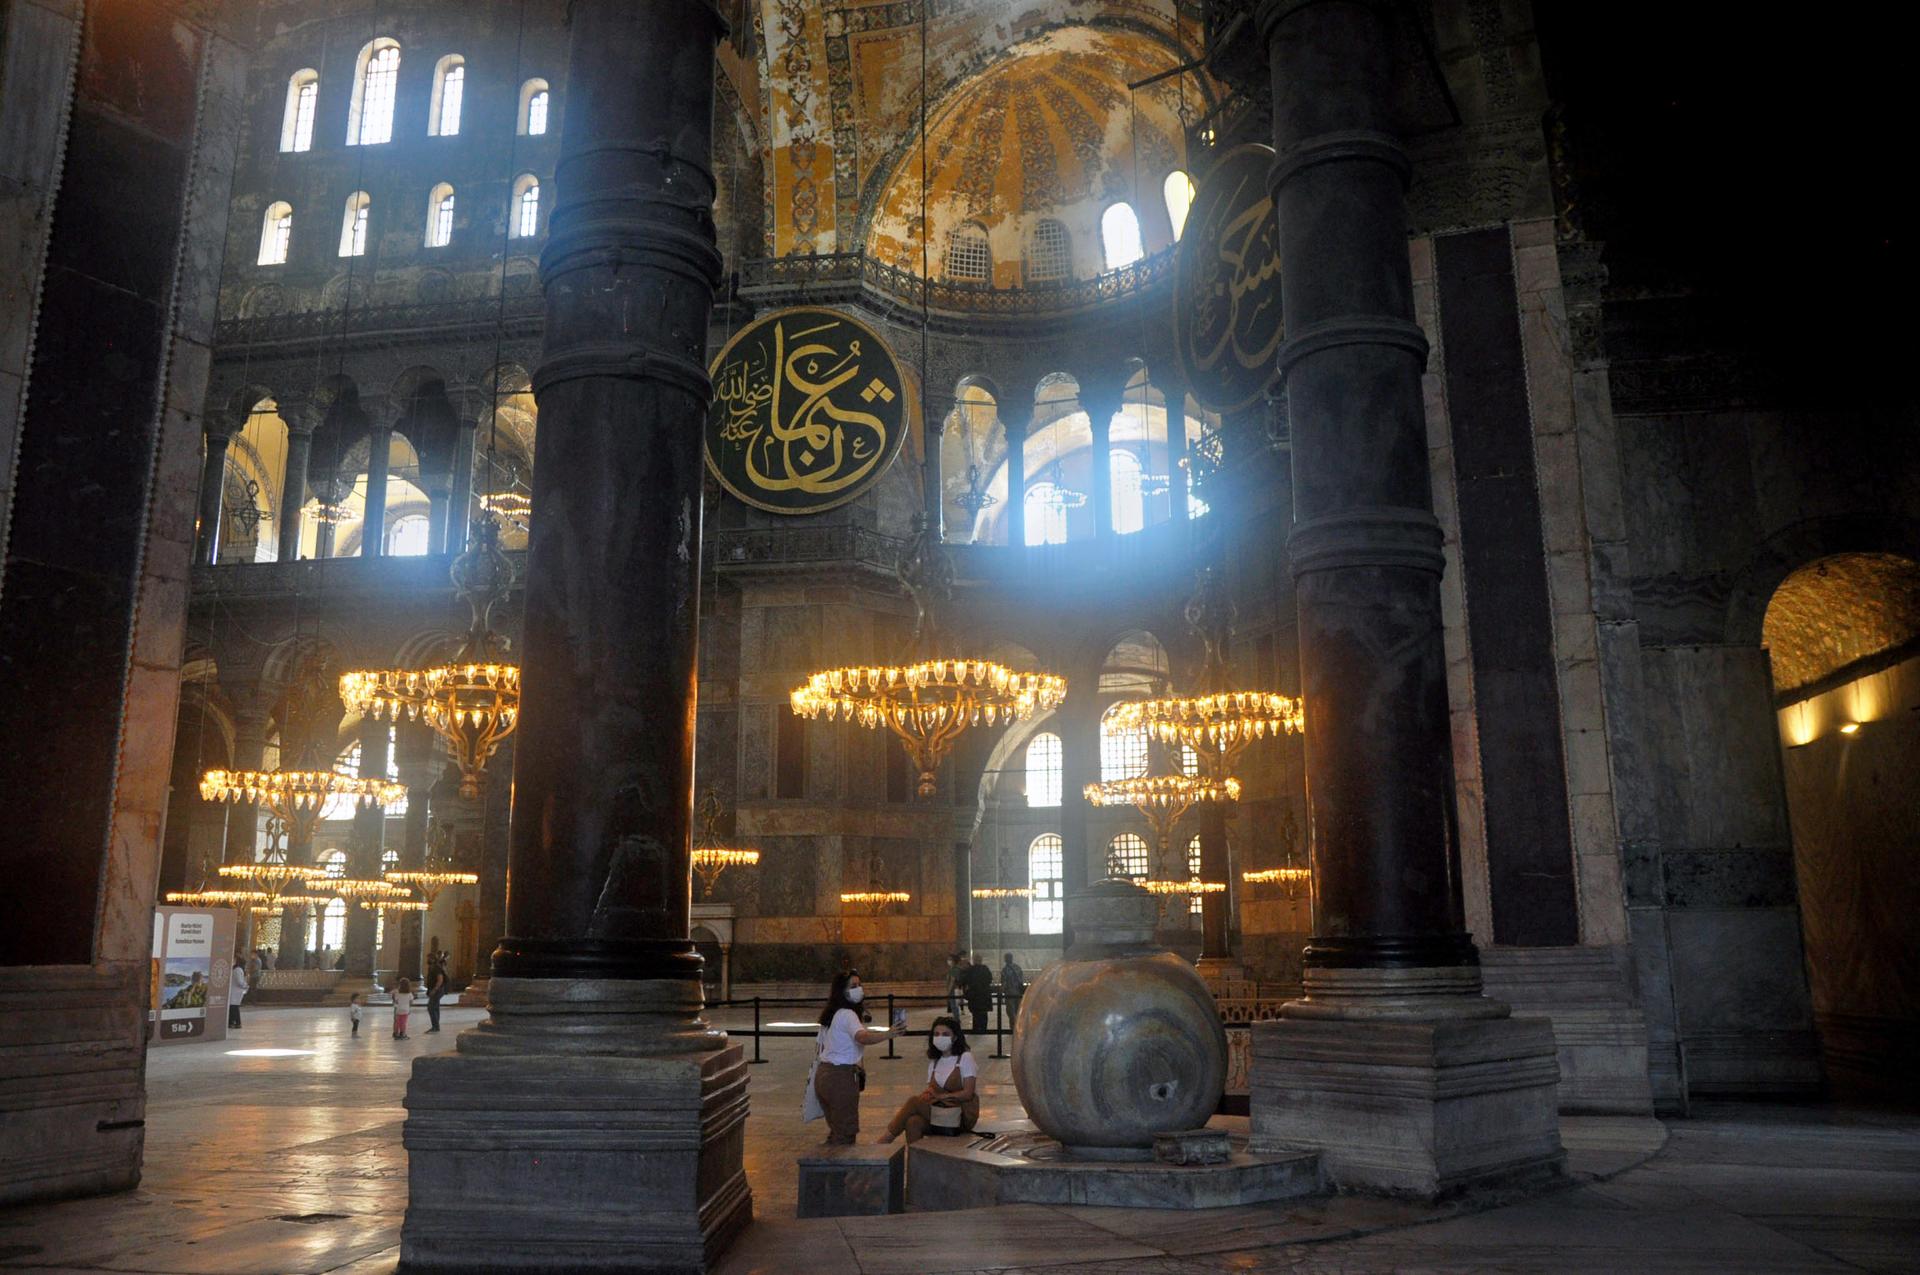 Tourists take in the ornate beauty of the Haghia Sophia dome